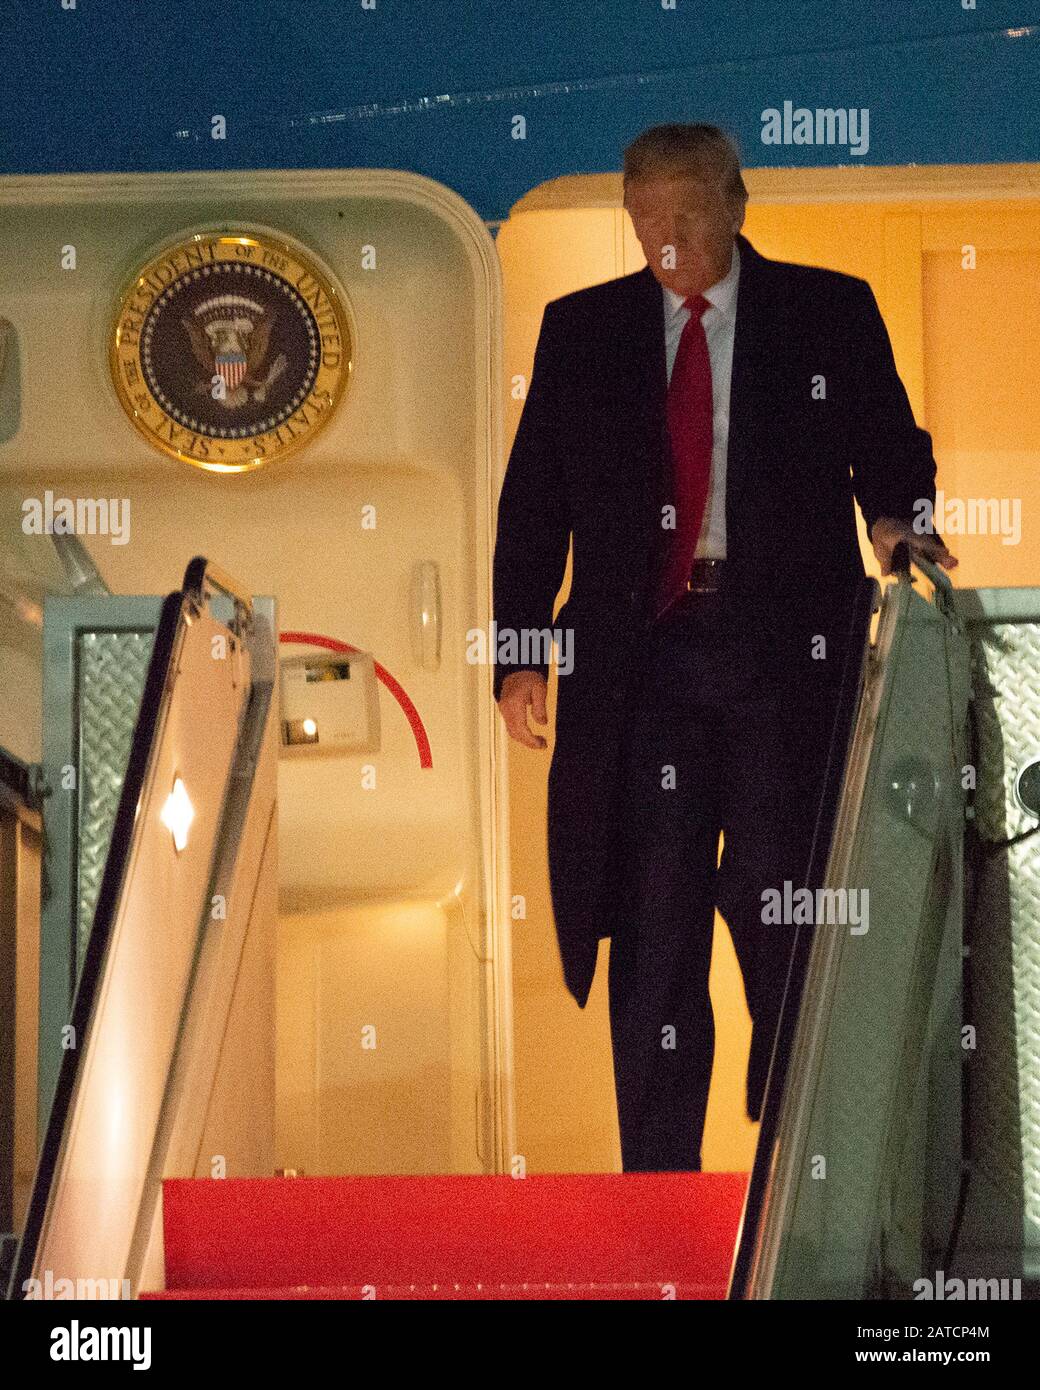 President Donald J. Trump disembarks Air Force One Jan. 28, 2020, on the FAA William J. Hughes Technical Center ramp at the Atlantic City International Airport in Egg Harbor Township, N.J. Trump exited the highly customized Boeing 747-200B aircraft prior to boarding Marine One, a U.S. Marine Corps VH-3D Sea King, en route to his next destination. (U.S. Air National Guard photo by Amn Hunter Hires) Stock Photo